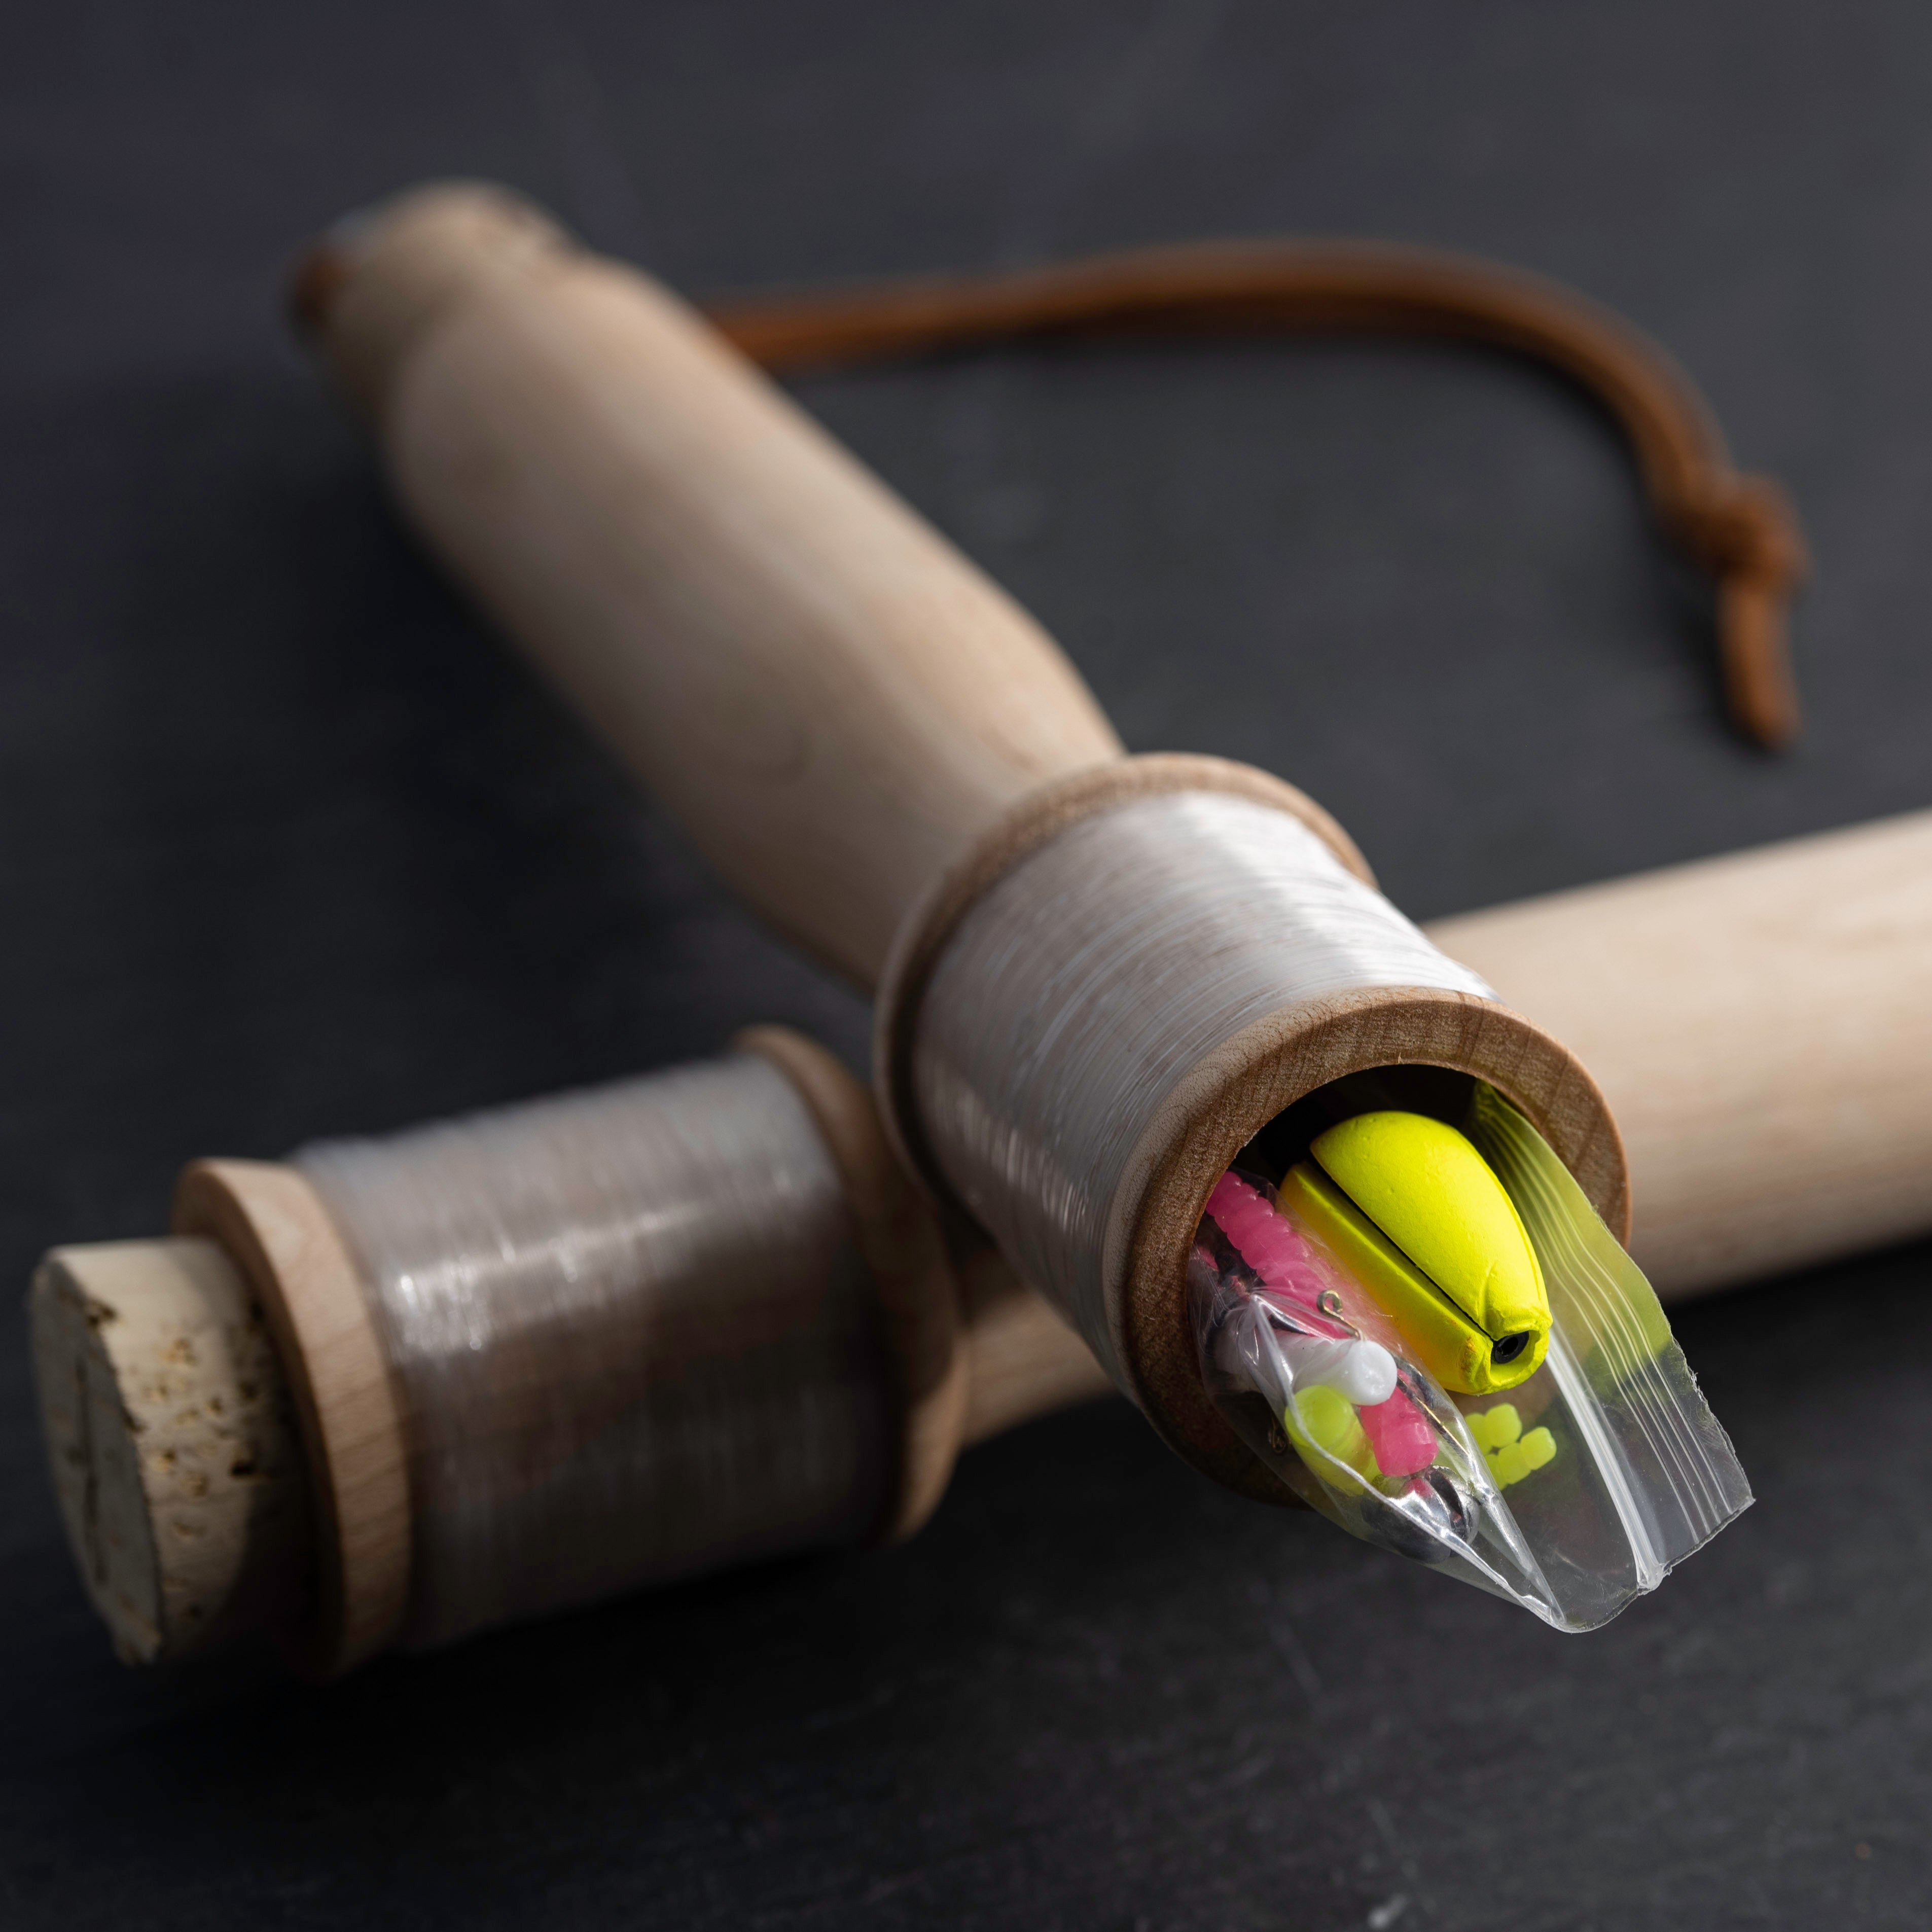 Make a hobo fishing kit and bait stick snare, all in one! 